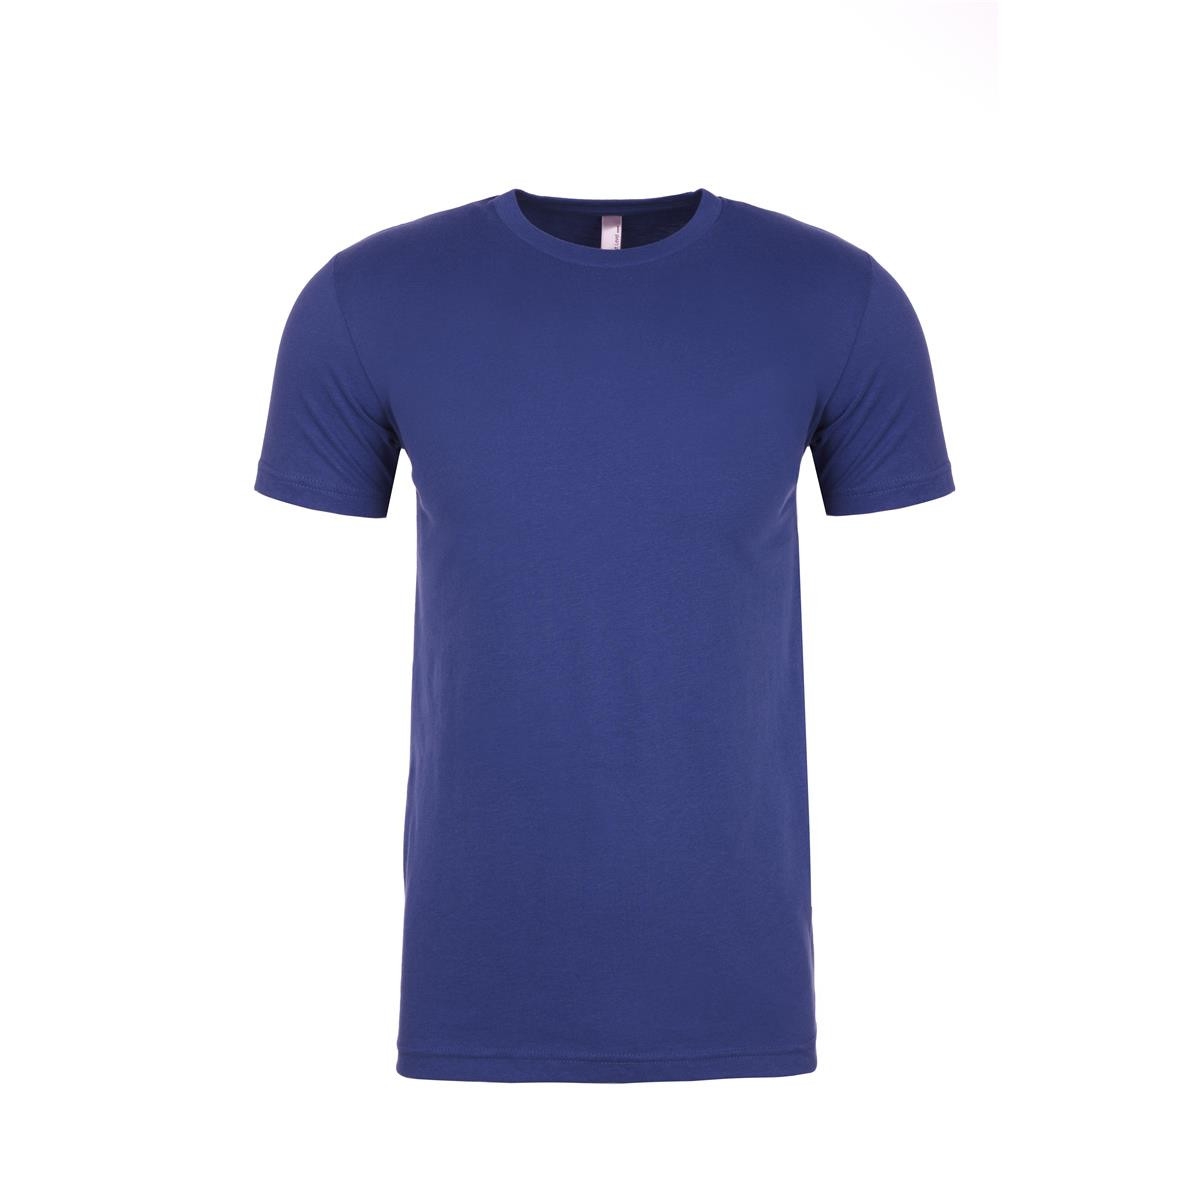 Men's Sueded Crew T-Shirt - Global CMA